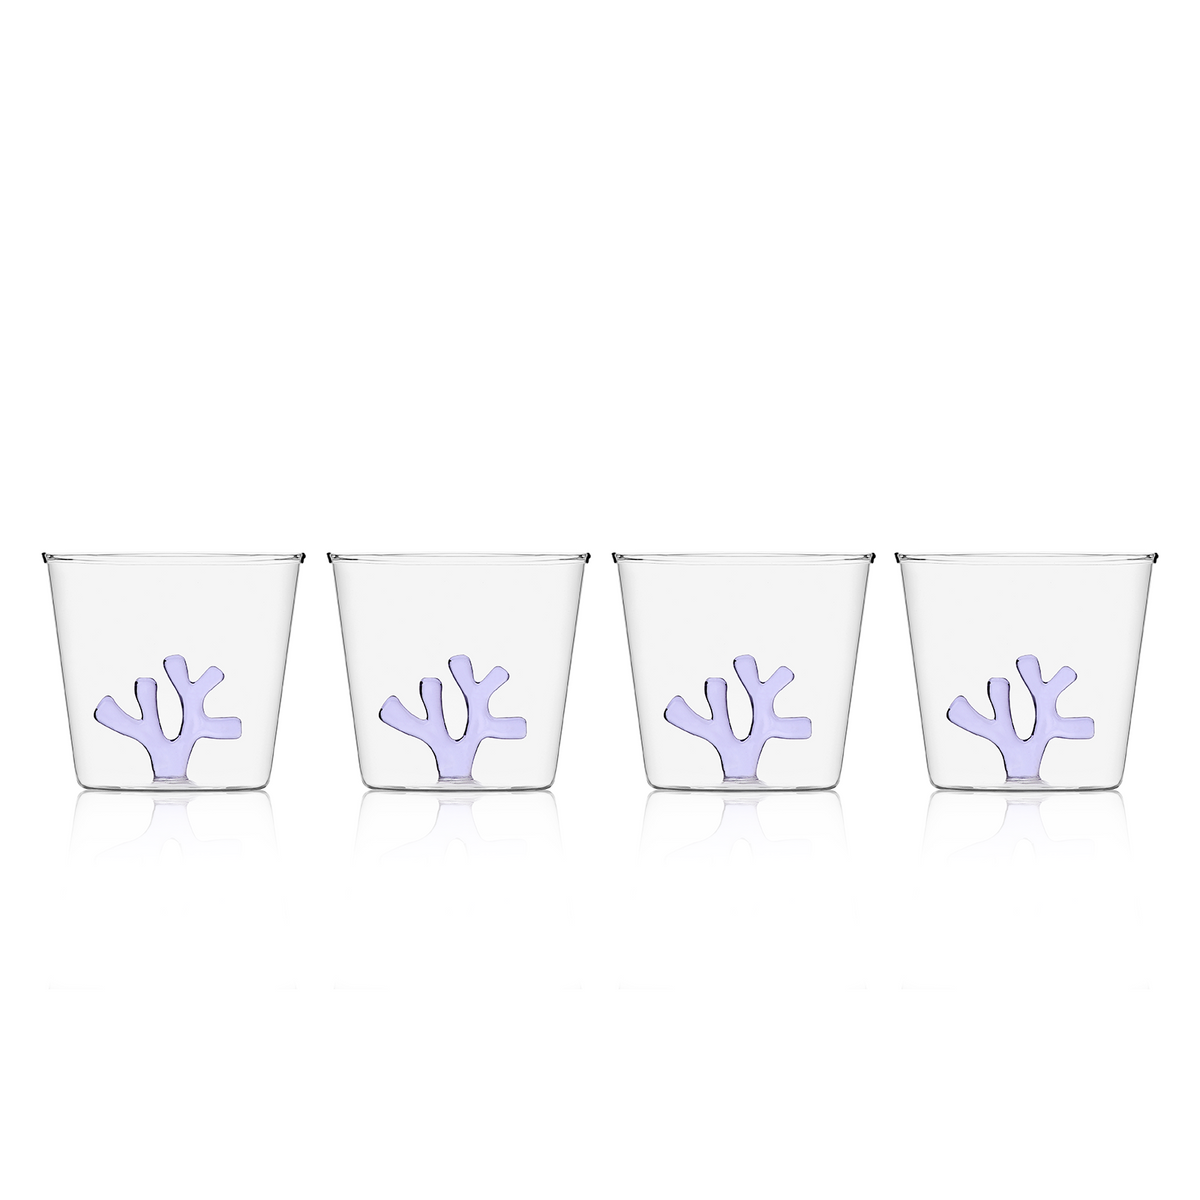 A collection of all-purpose clear coloured glassware feature an lilac coral on the inside. Sprezz Whimsical Tumbler Glasses Lilac Purple | Colored Glassware Set of Four